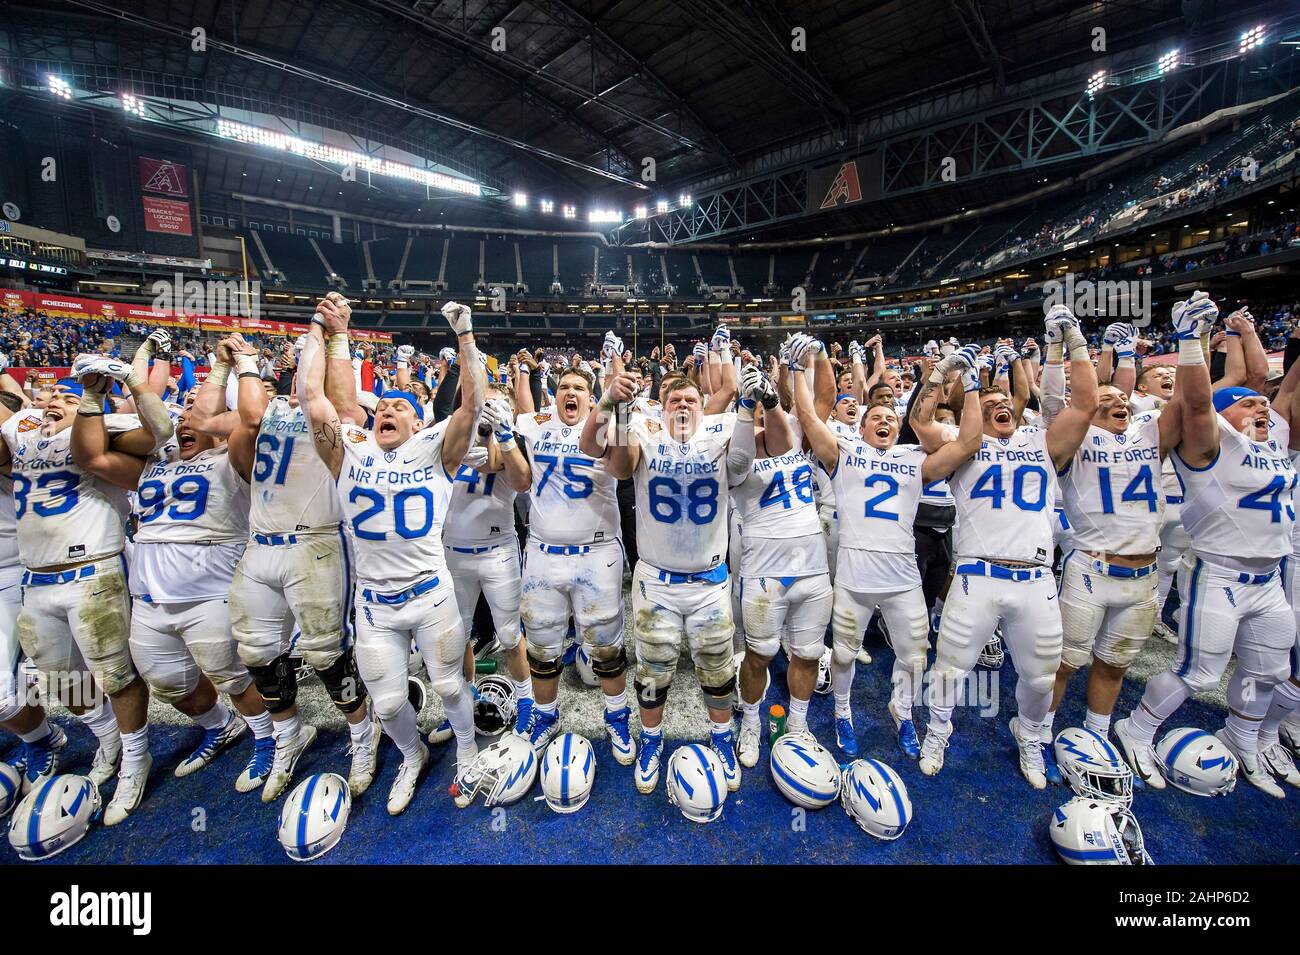 The U.S. Air Force Academy football players join together in a victory cheer following victory over Washington State University in the Cheez-It Bowl championship game at Chase Field December 27, 2019 in Phoenix, Arizona. Air Force defeated Washington State 31-21 to finish their season with an 11-2 record and an eight game win streak making it the third best season in program history. Stock Photo